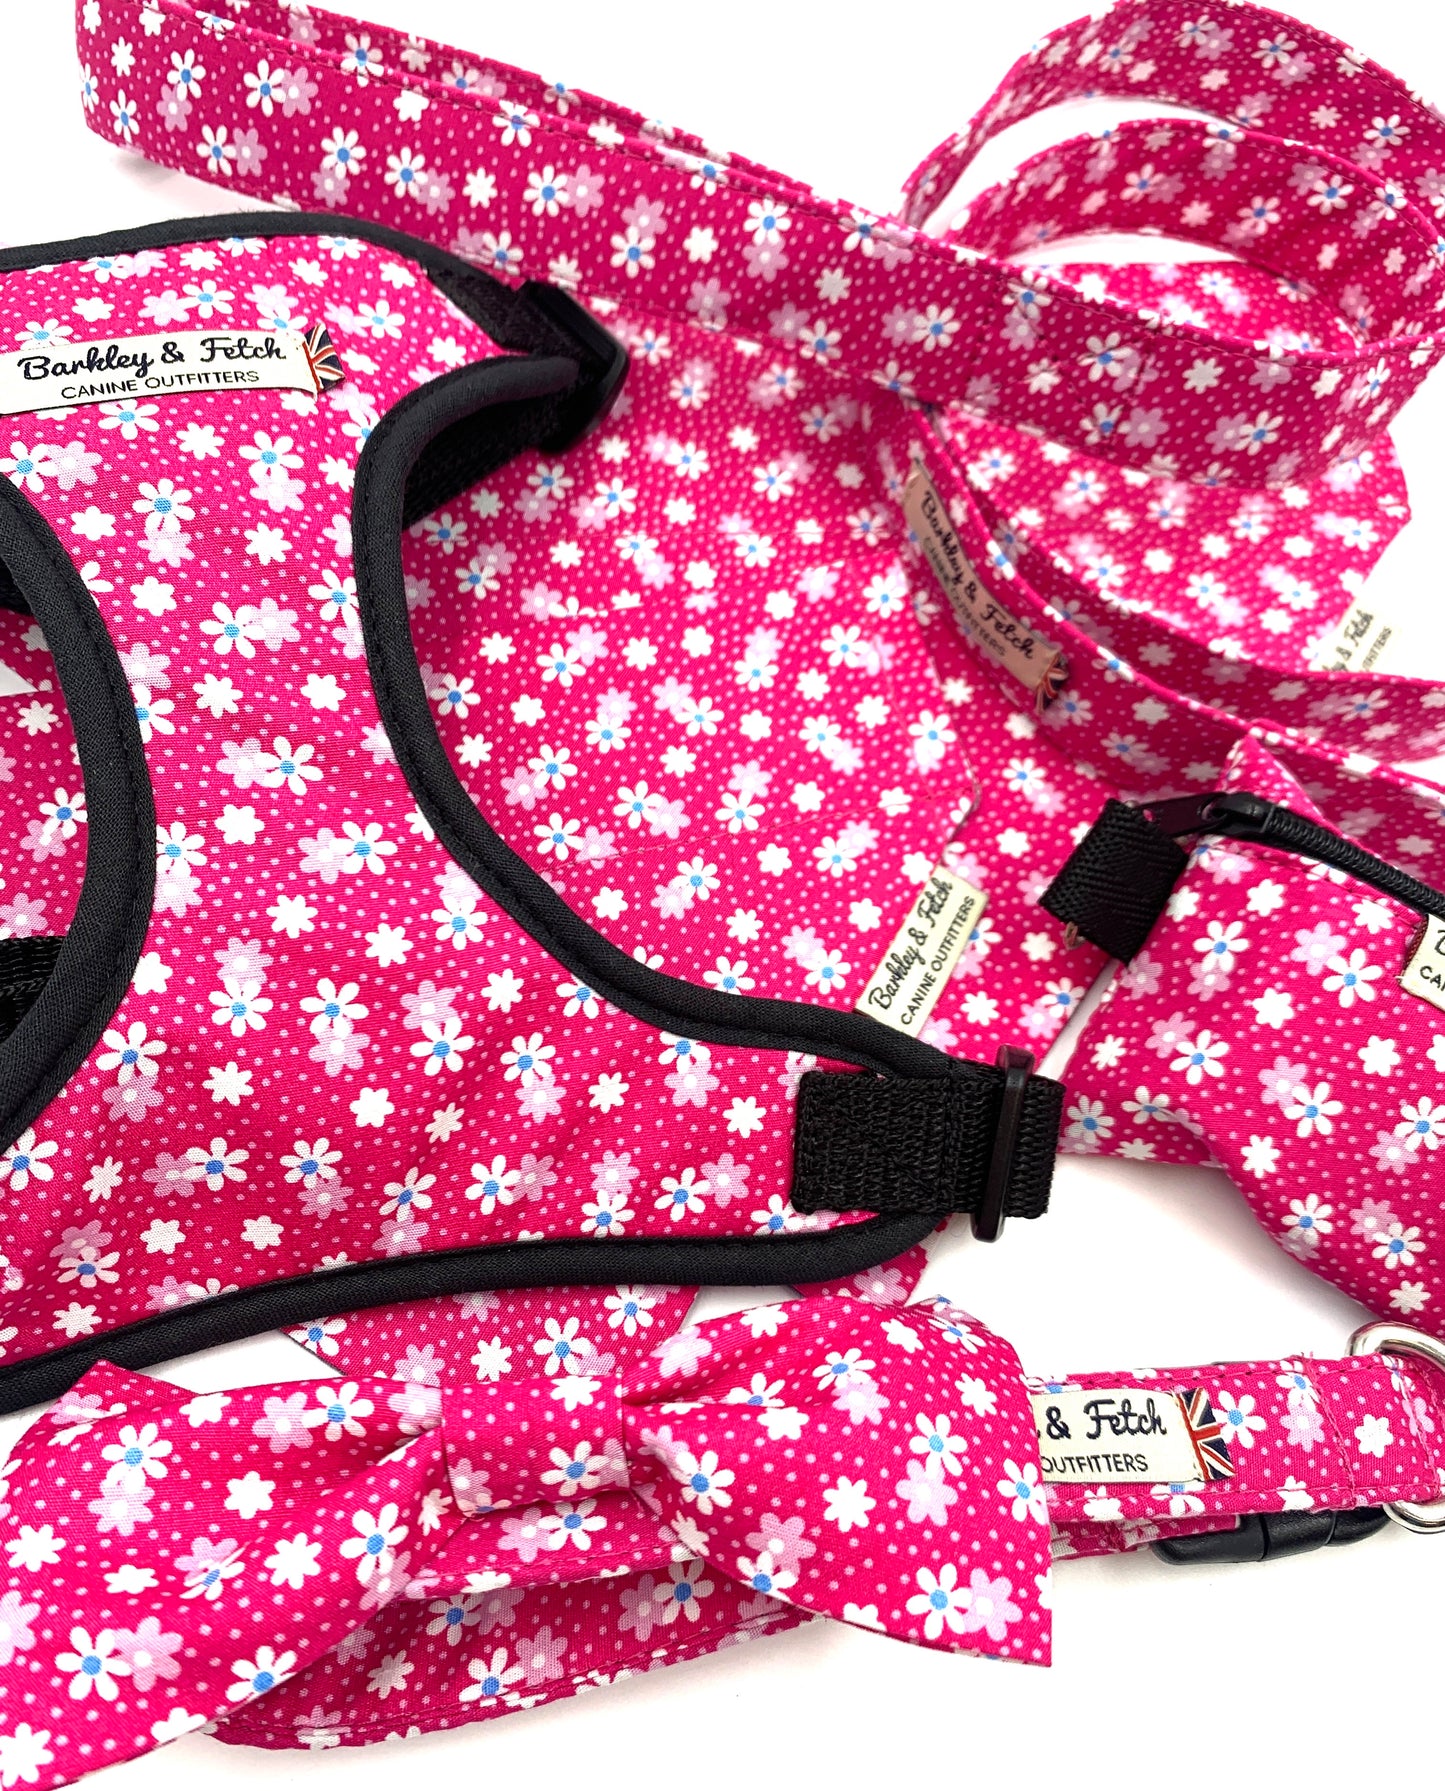 Hot Pink Floral Print Harness